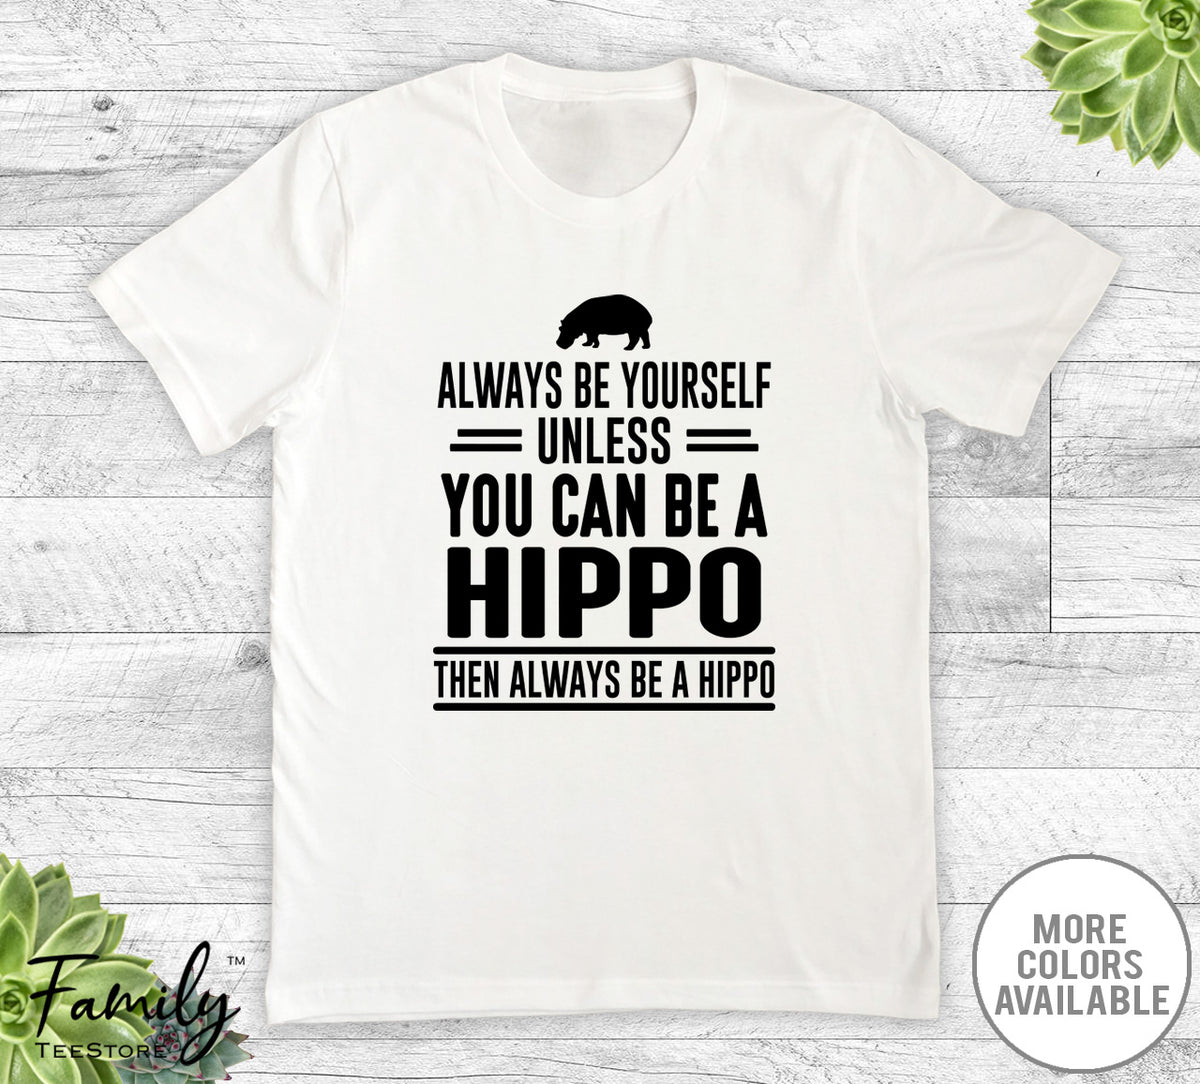 Always Be Yourself Unless You Can Be A Hippo - Unisex T-shirt - Hippo Shirt - Hippo Gift